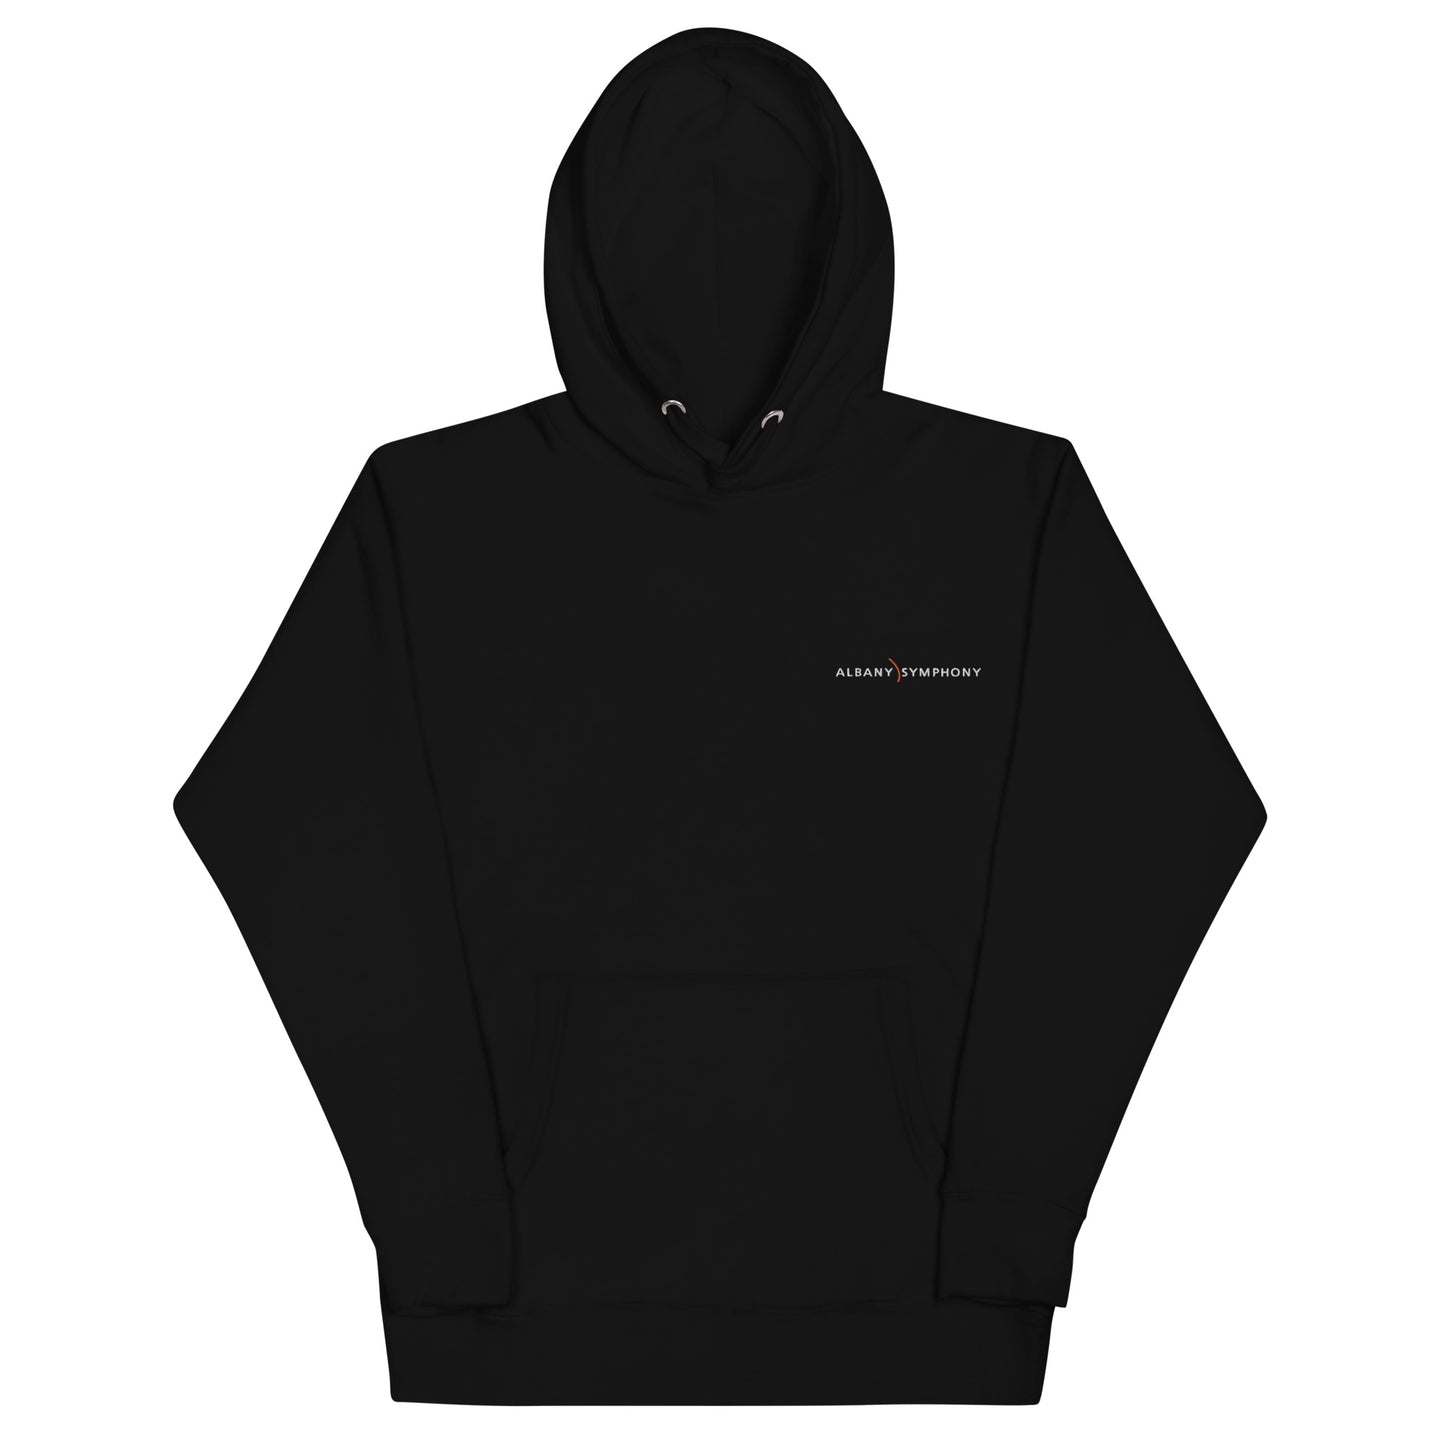 Hoodie with white logo